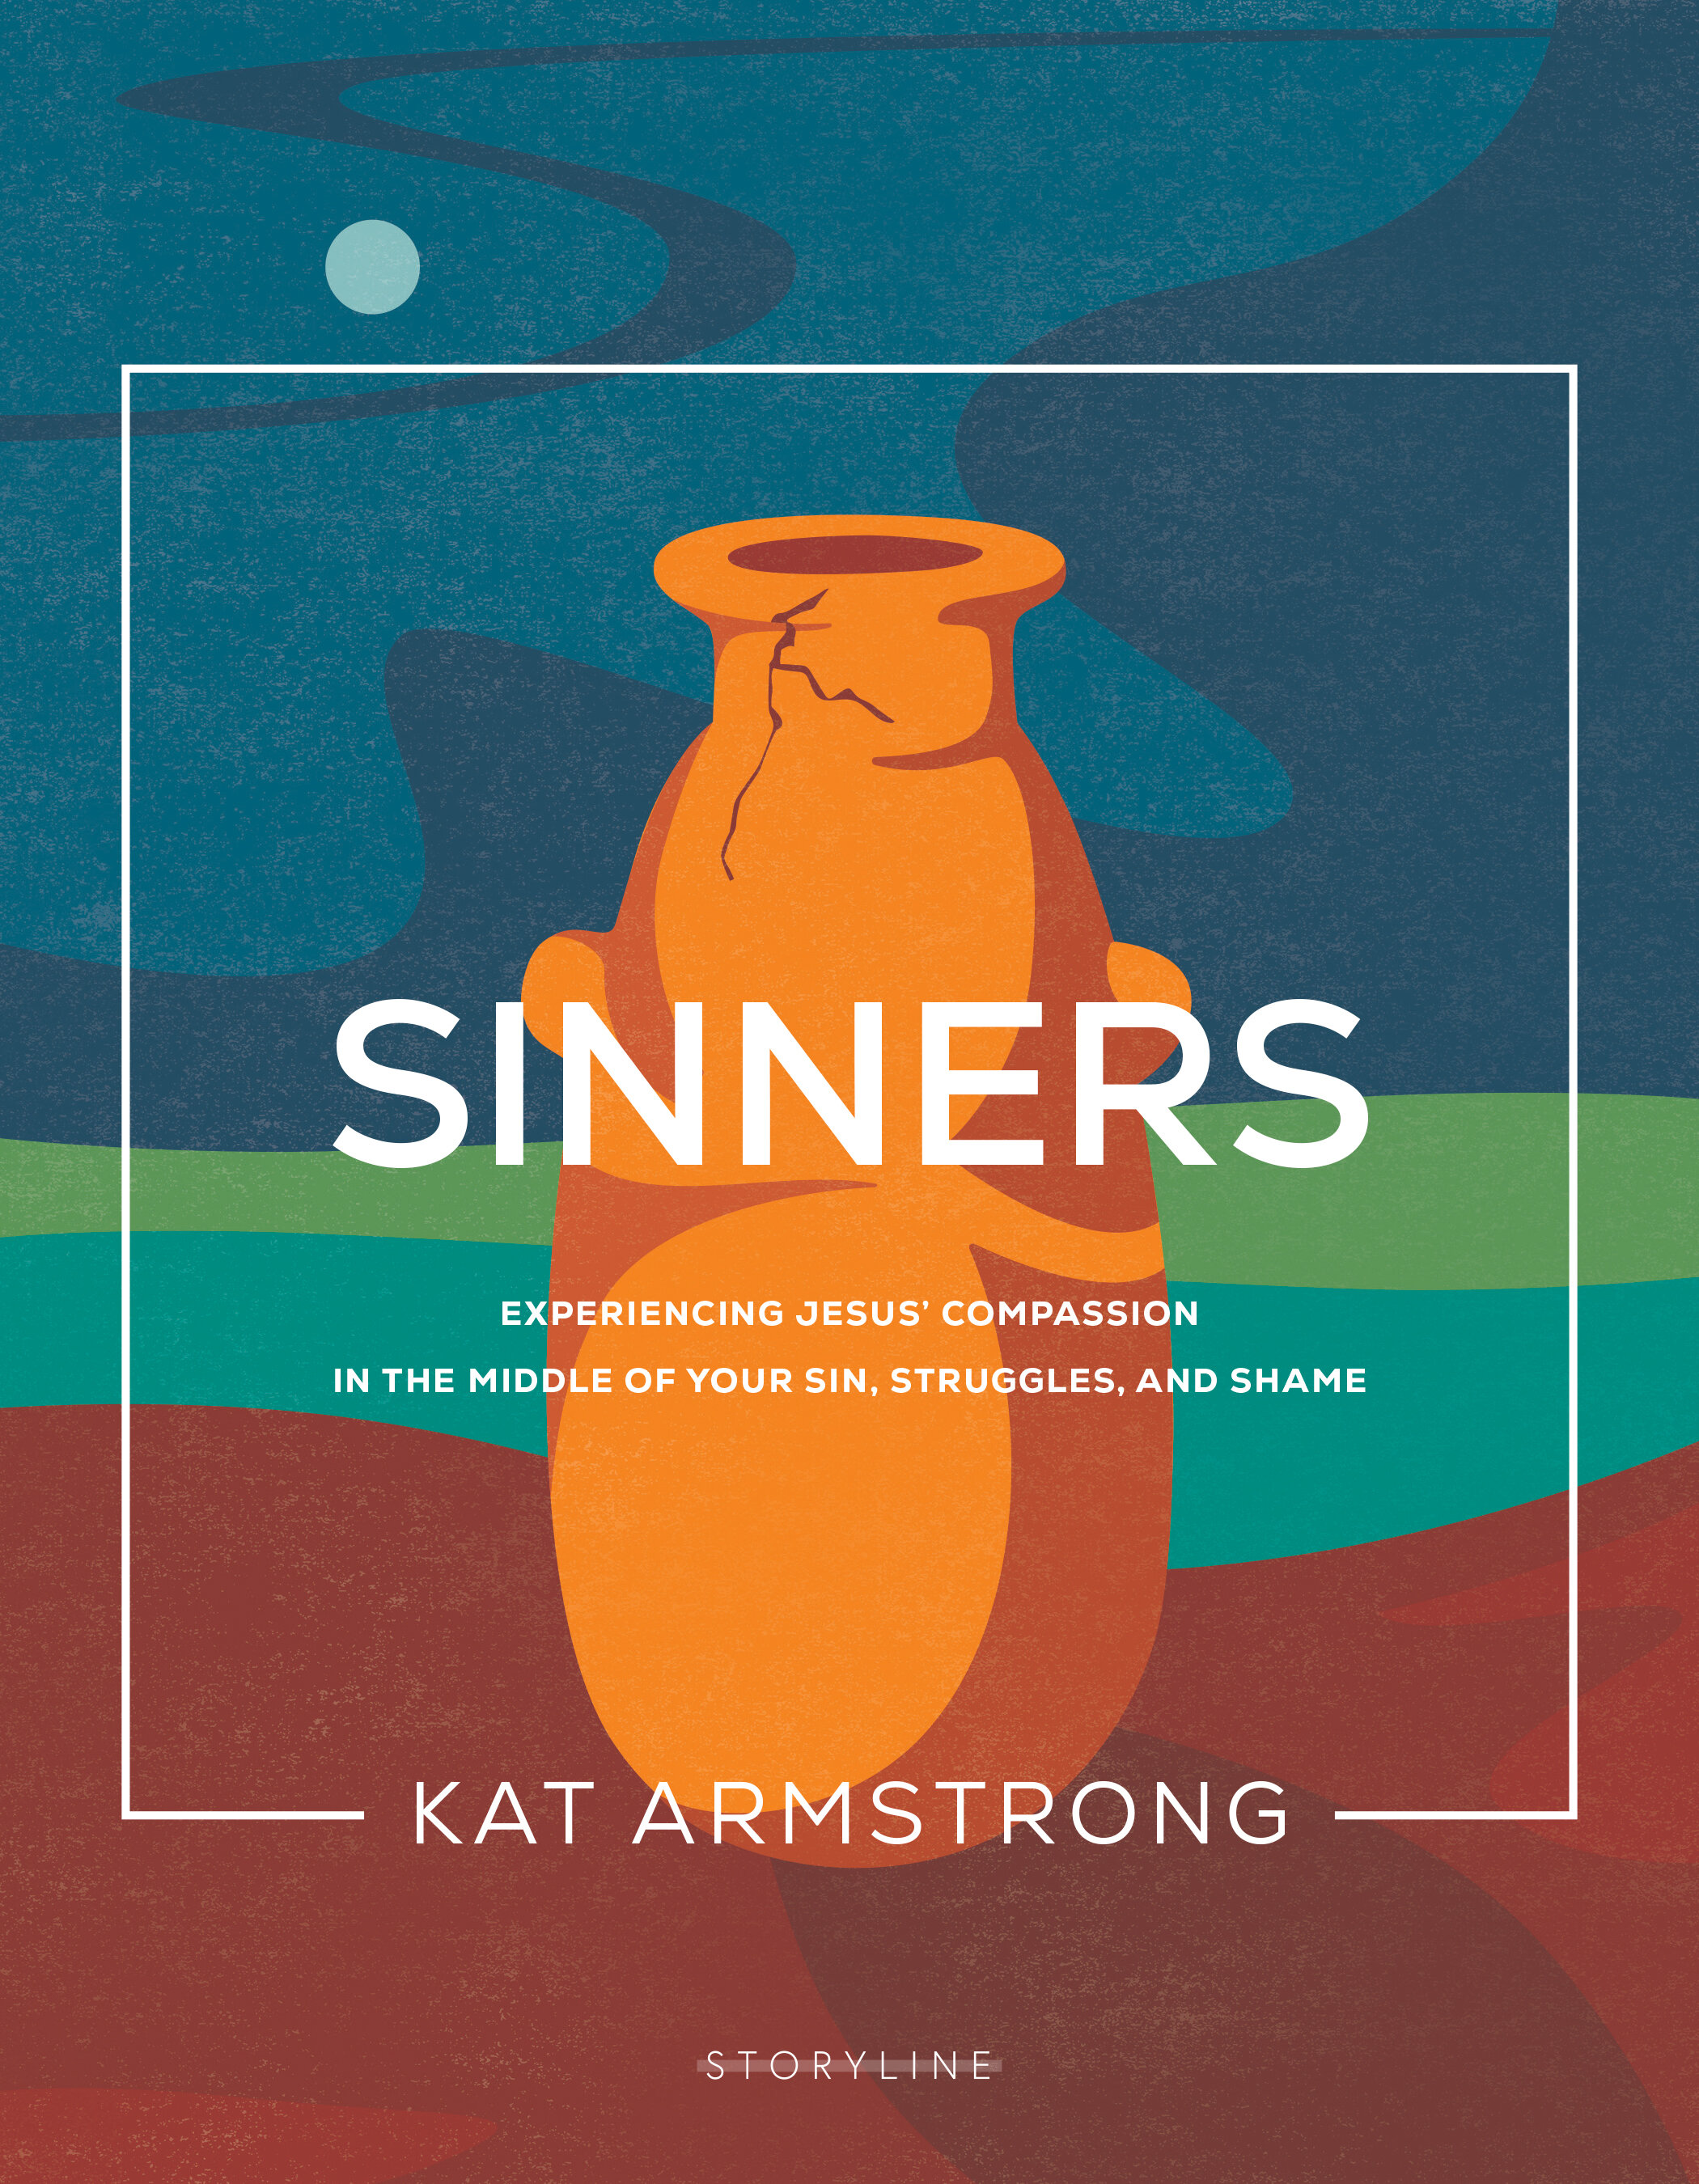 Sinners: Experiencing Jesus’ Compassion in the Middle of Your Sin, Struggles, and Shame